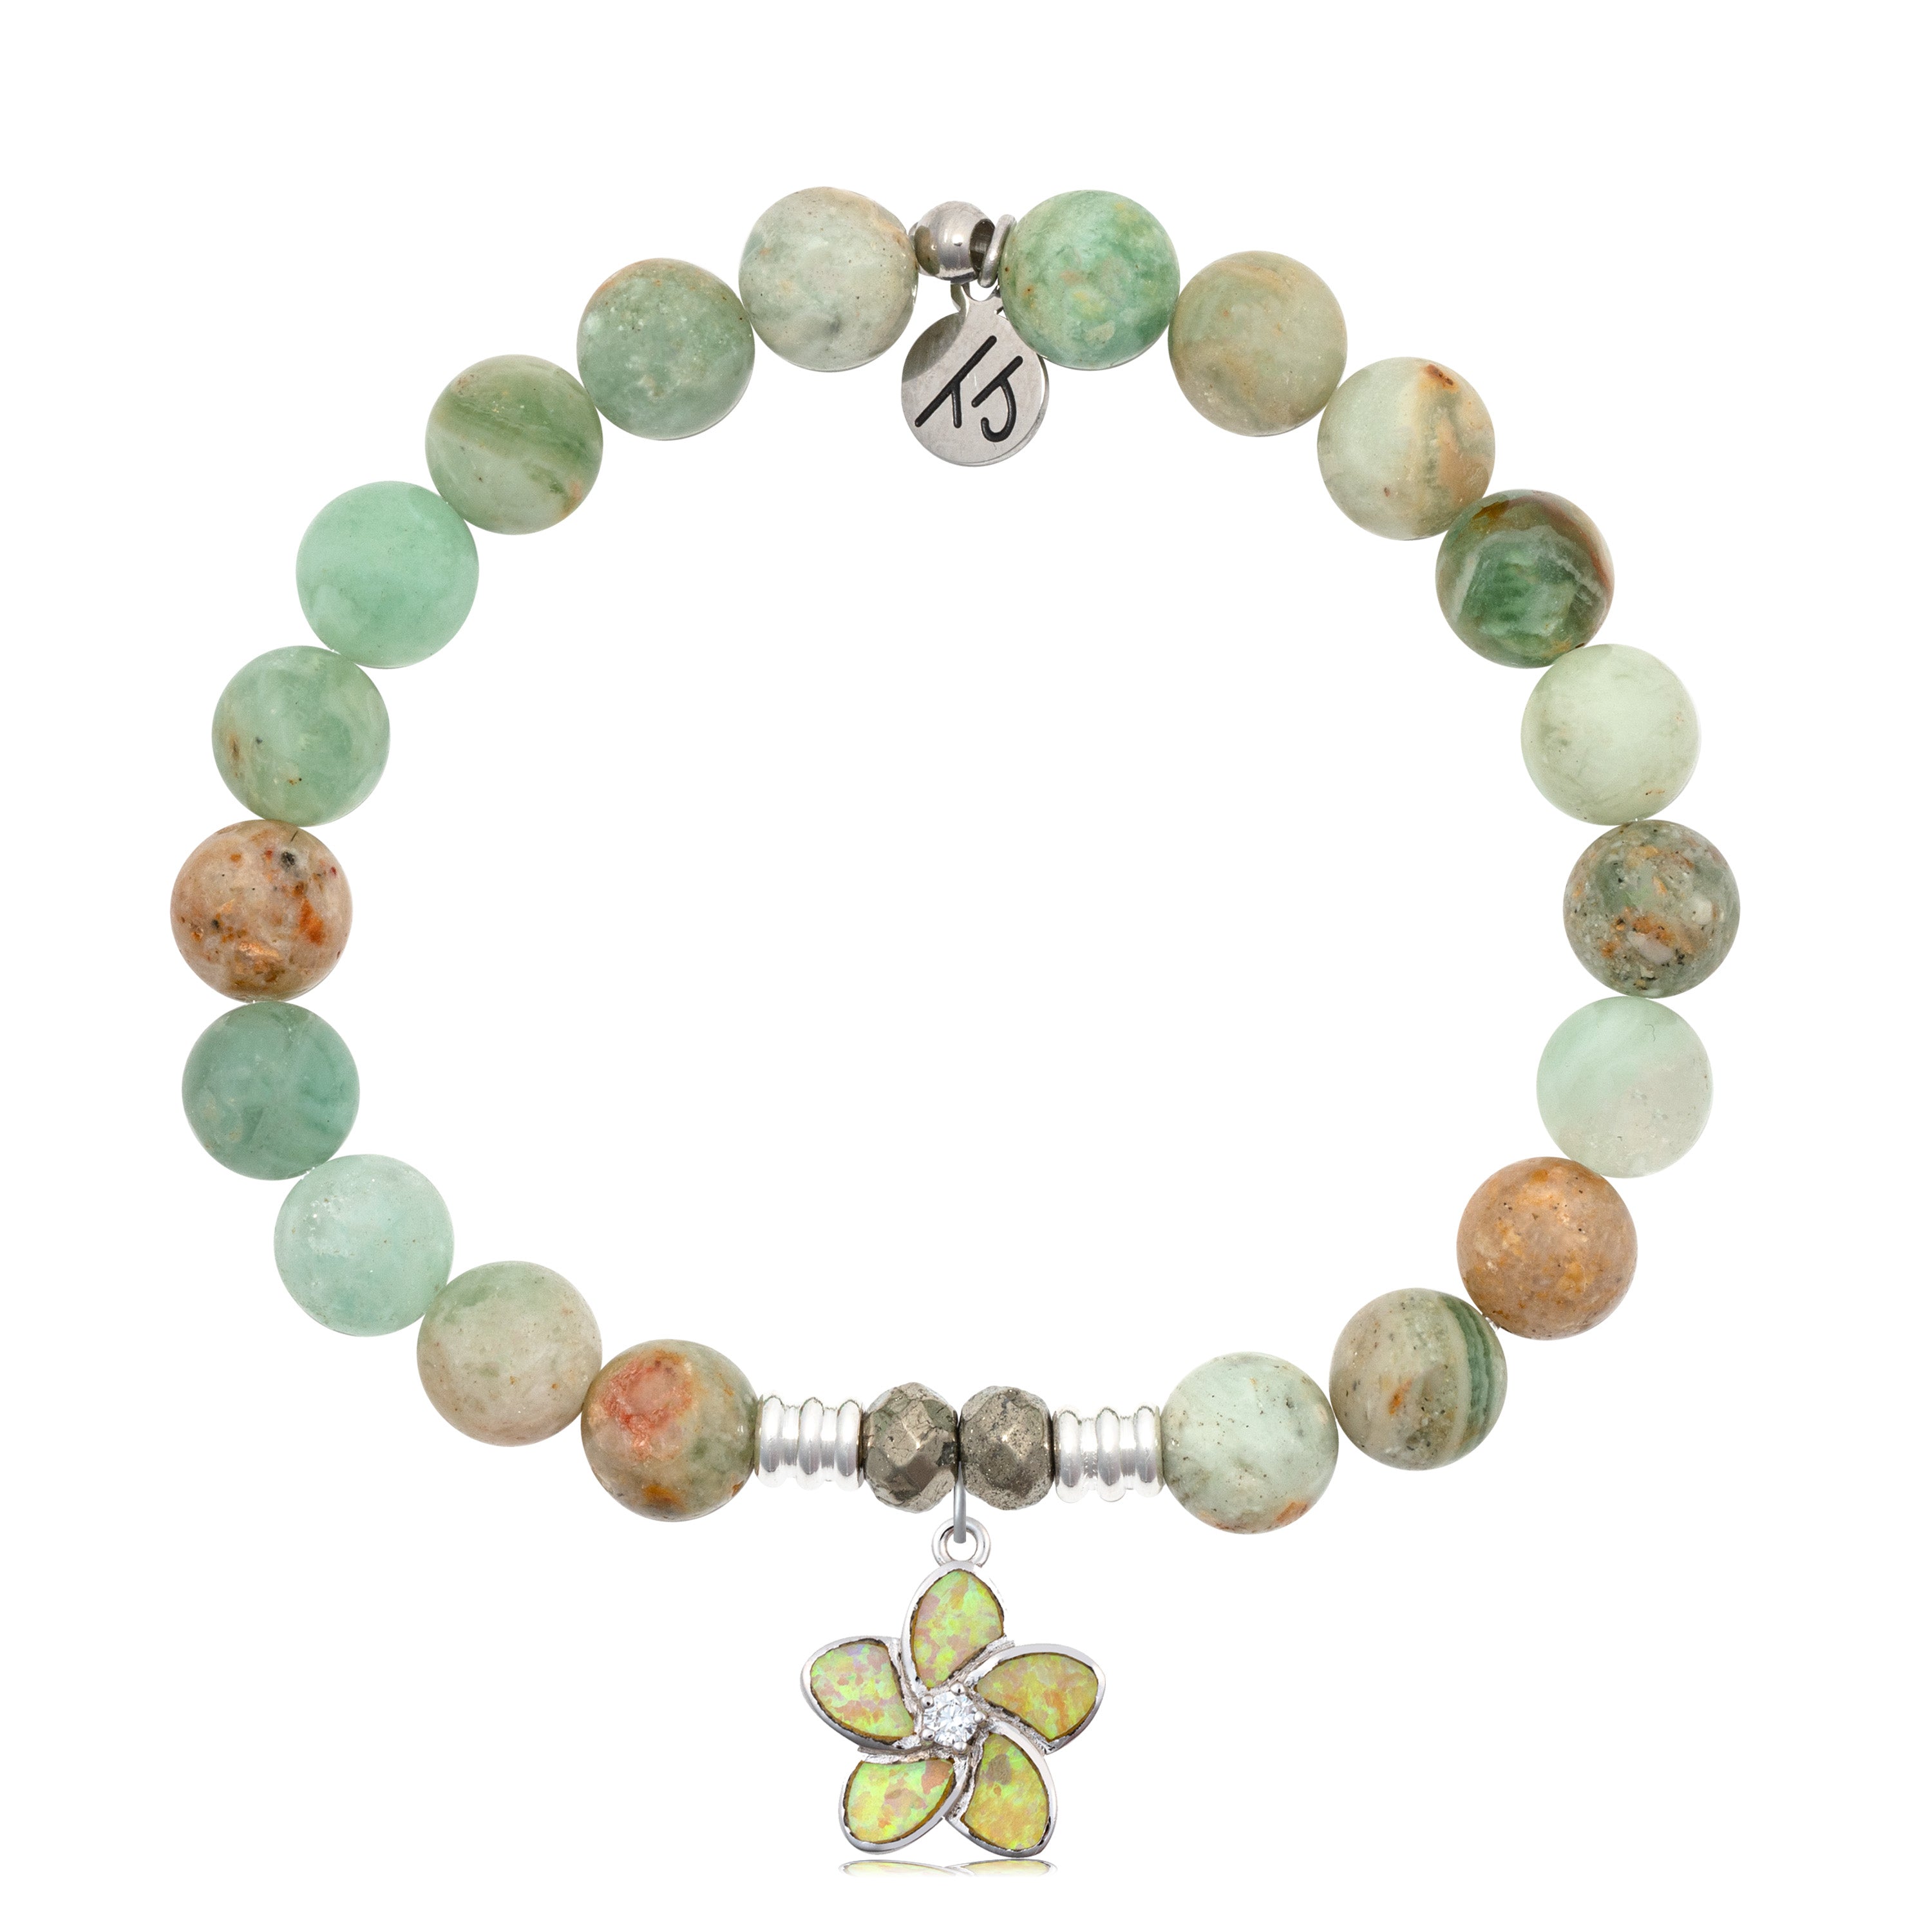 Pyrite Prosperity and Protection Bracelet – Shop Dreamers of Dreams